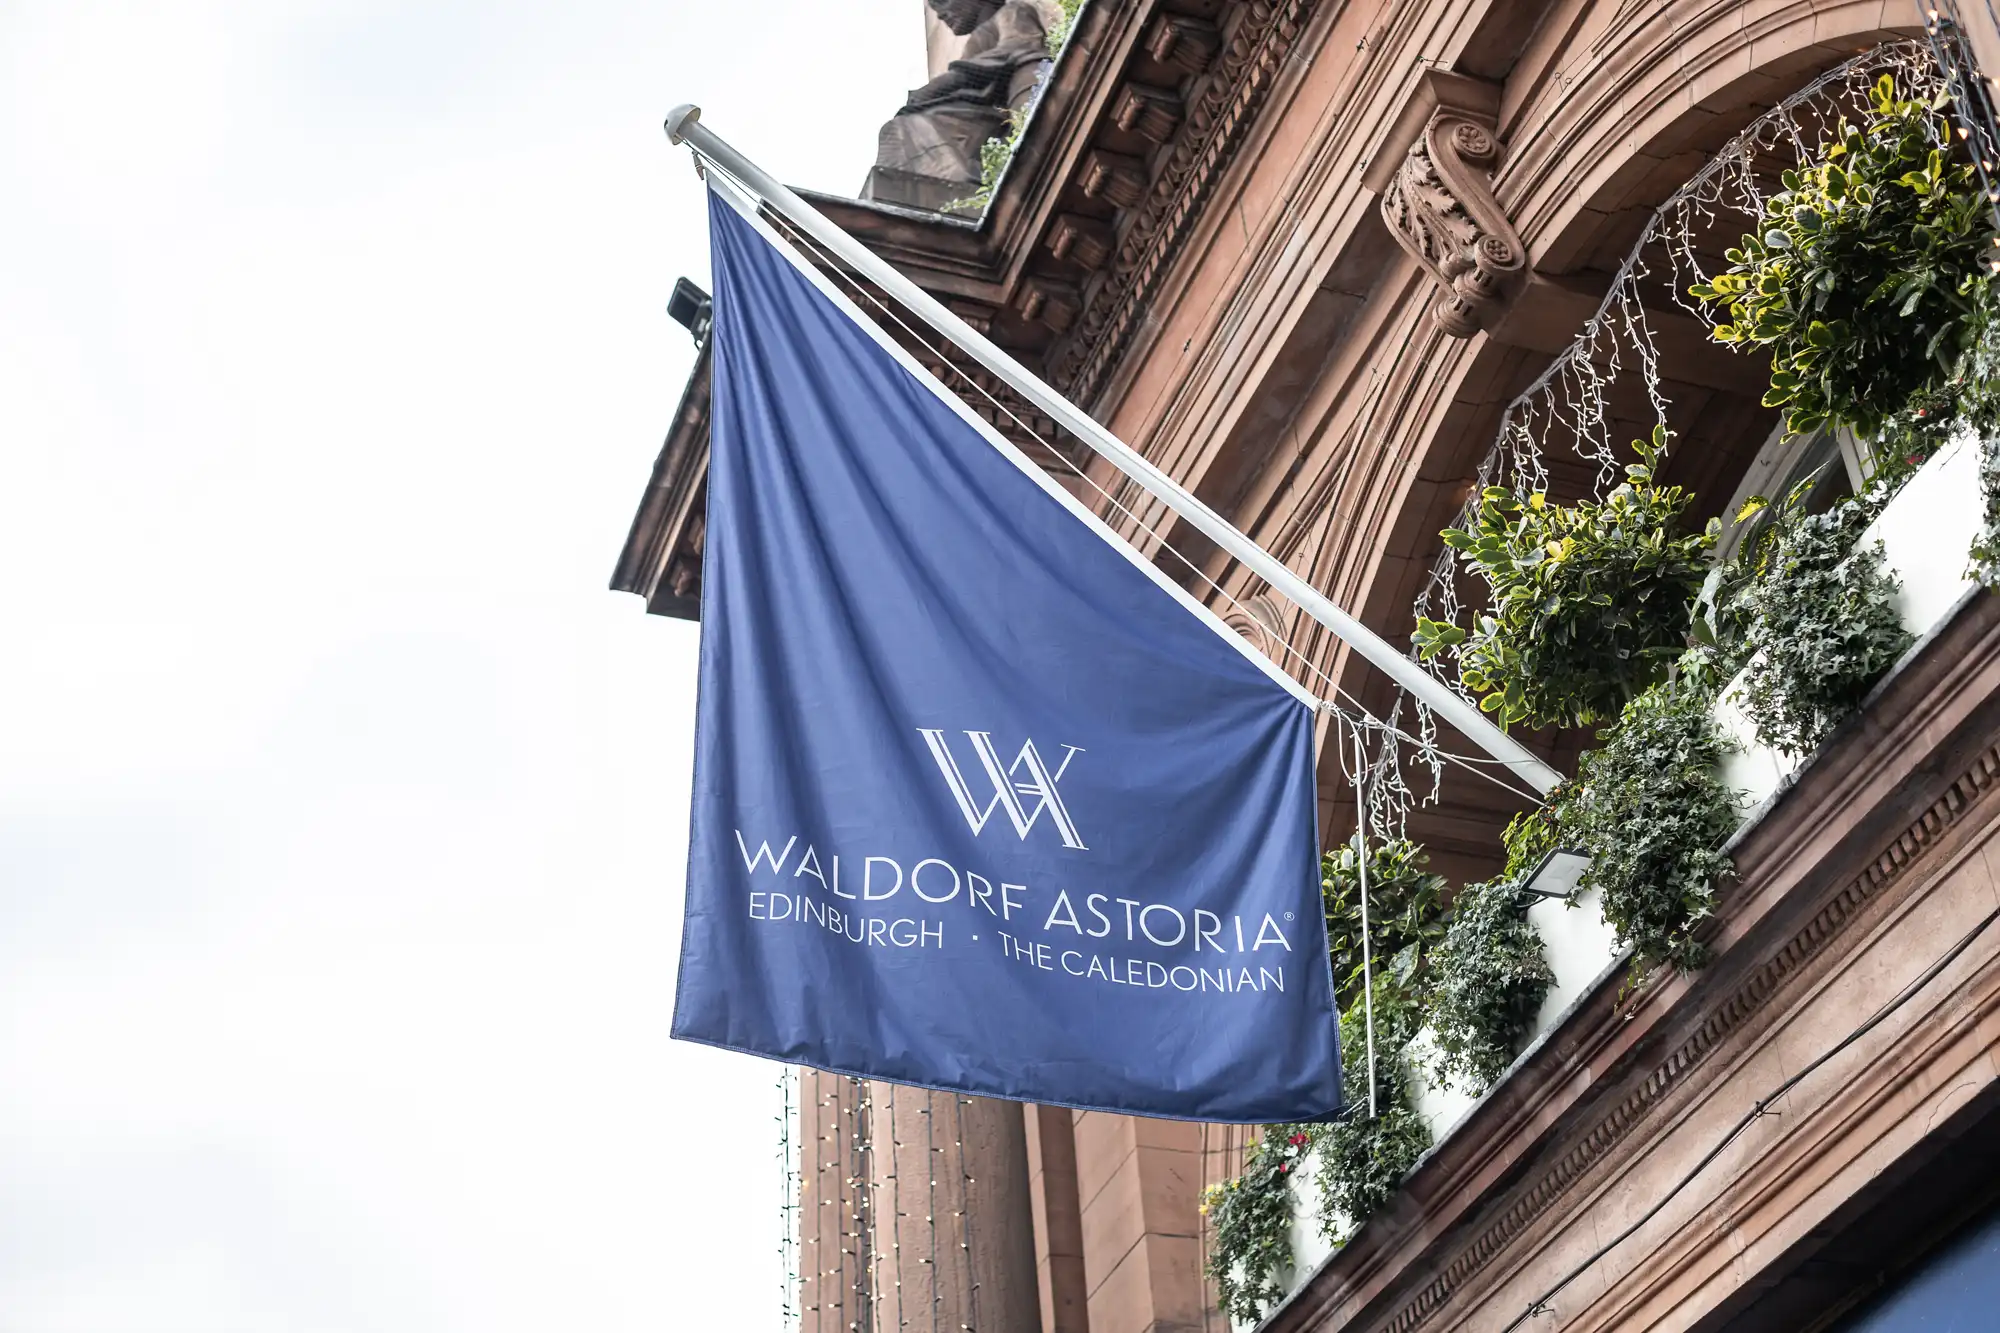 A blue flag with white text reading "Waldorf Astoria Edinburgh - The Caledonian" is mounted on the exterior of a historic building adorned with greenery.